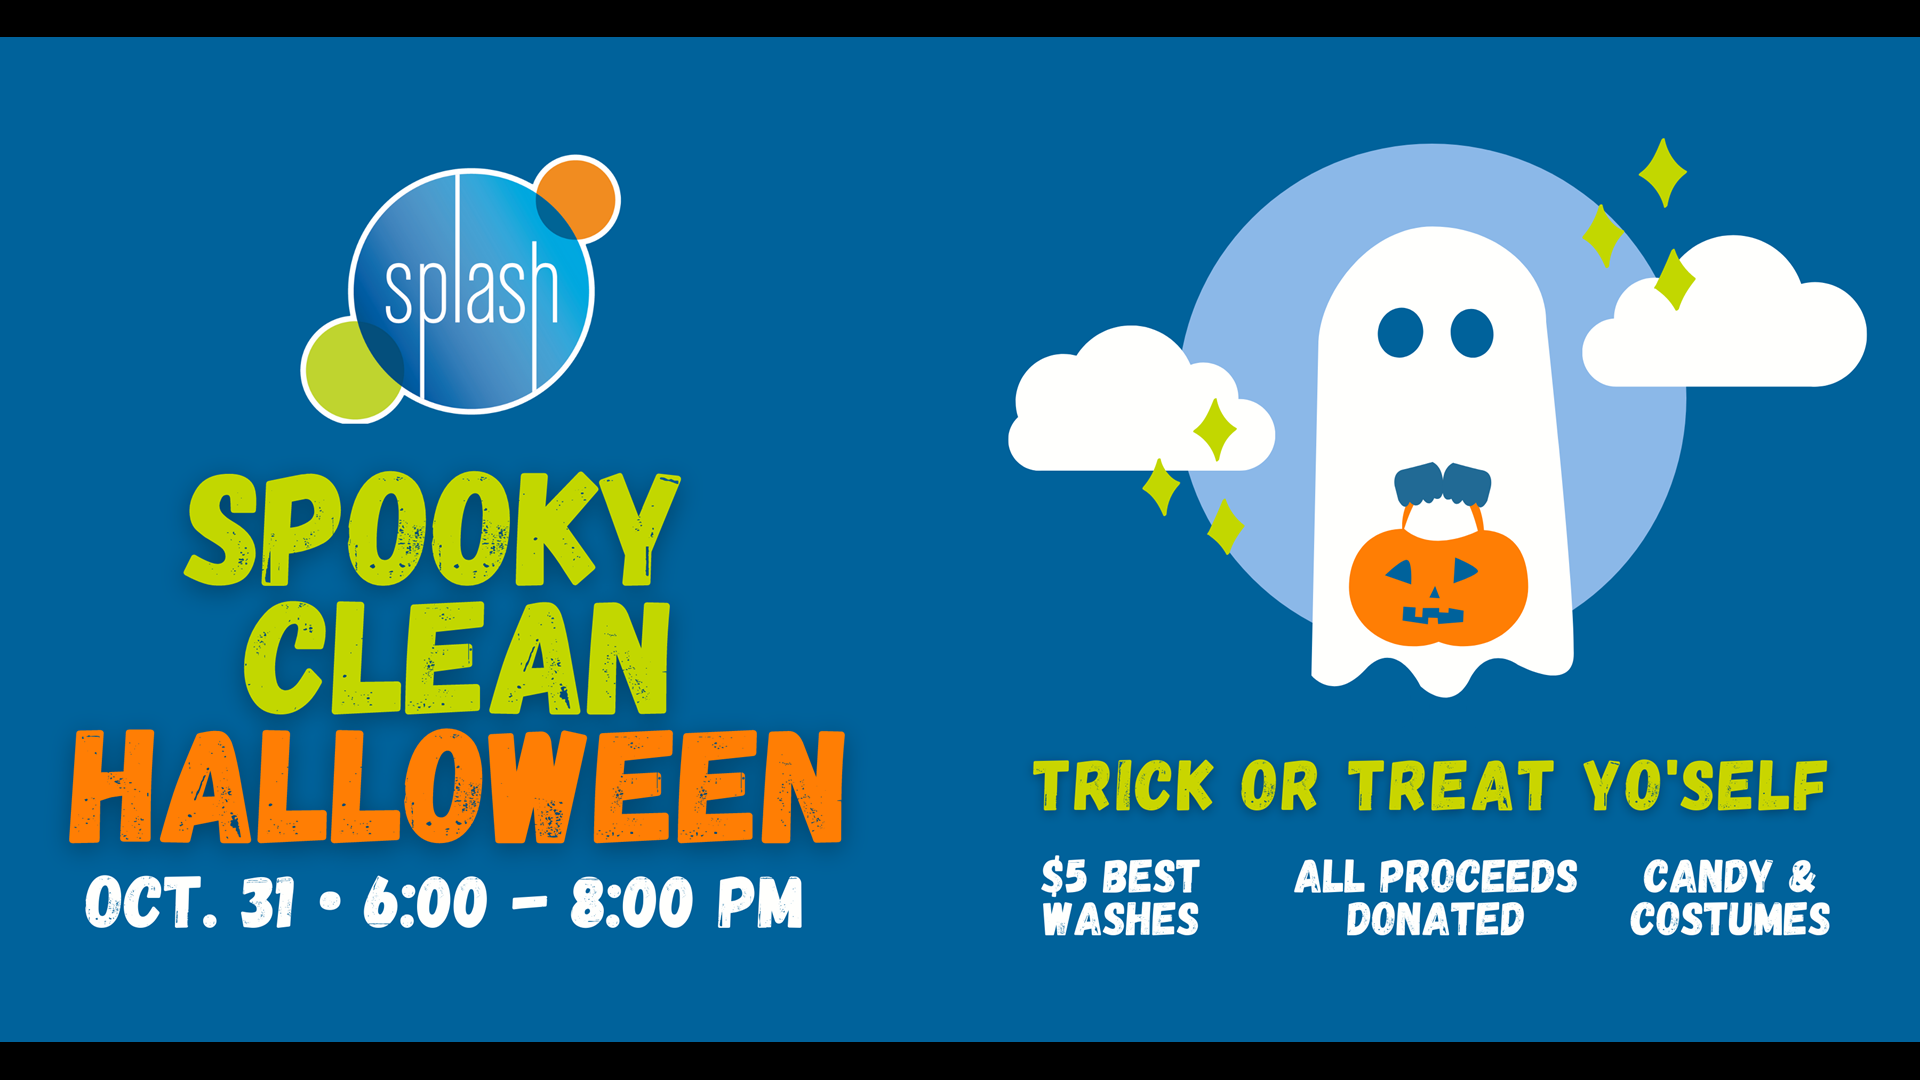 Splash Car Wash & Oil Change is having a Spooky Clean Halloween event on Saturday, Oct. 31 from 6 to 8 p.m.